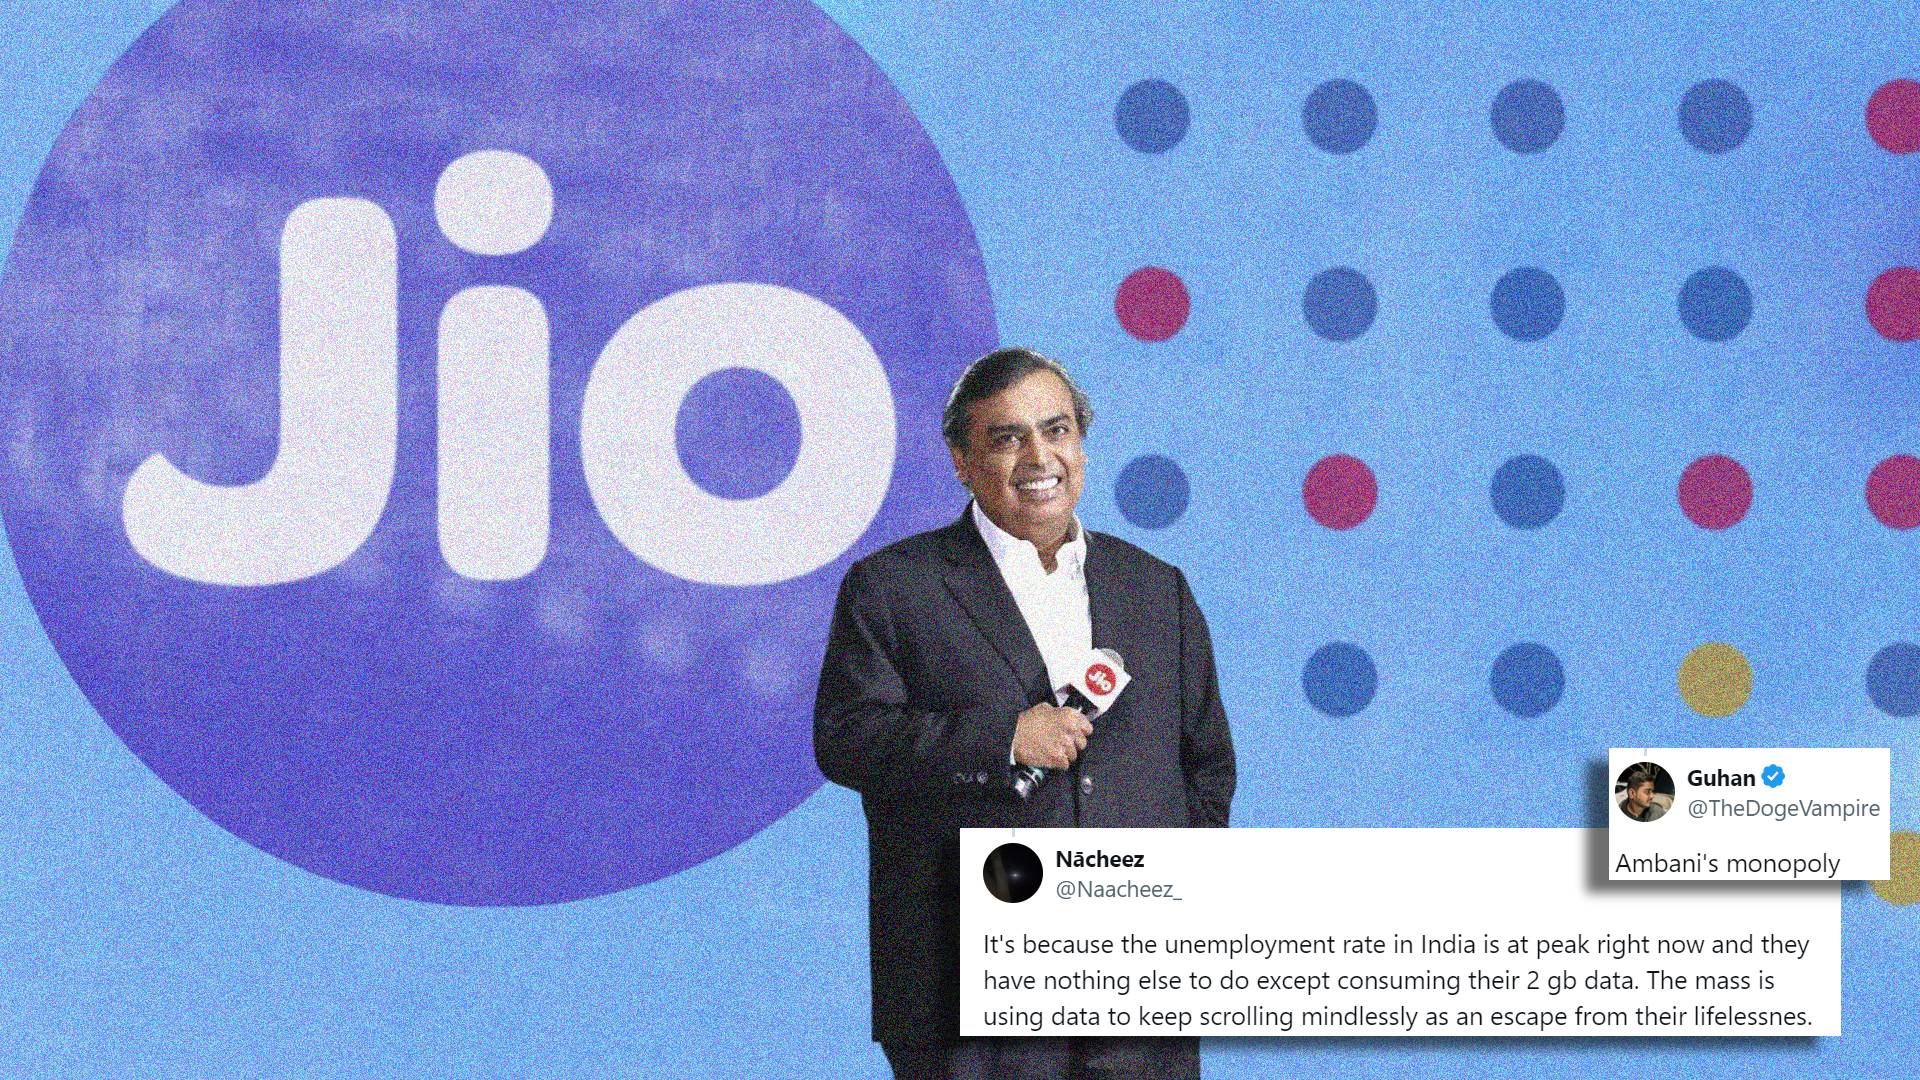 Reliance Jio Beats China Mobile To Become World’s Largest Mobile Operator; Internet Slams Ambanis Monopoly [Video]